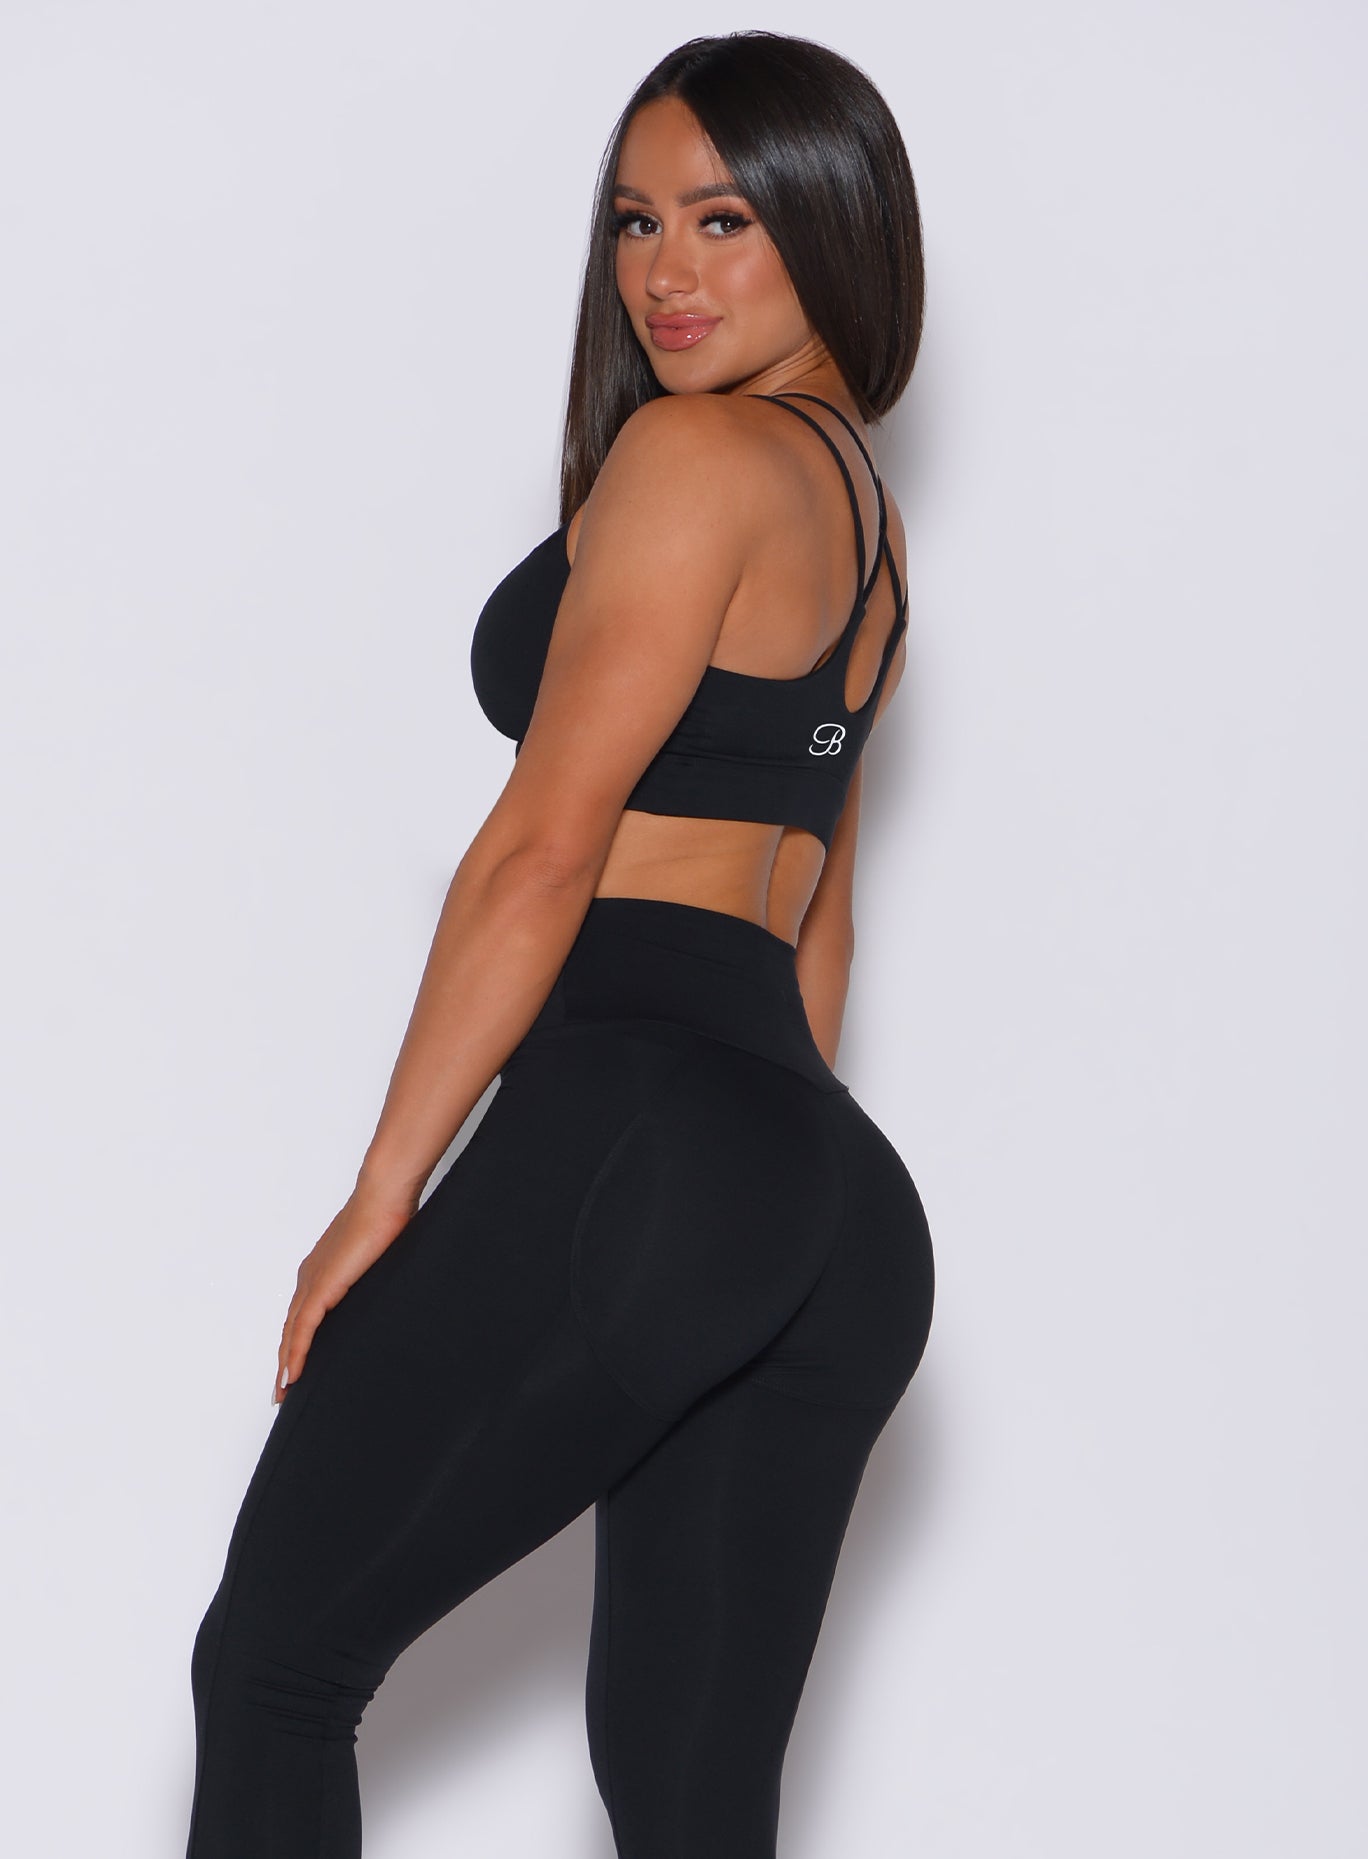 Left side profile view of a model facing to her left wearing our black twist sports bra and a matching leggings